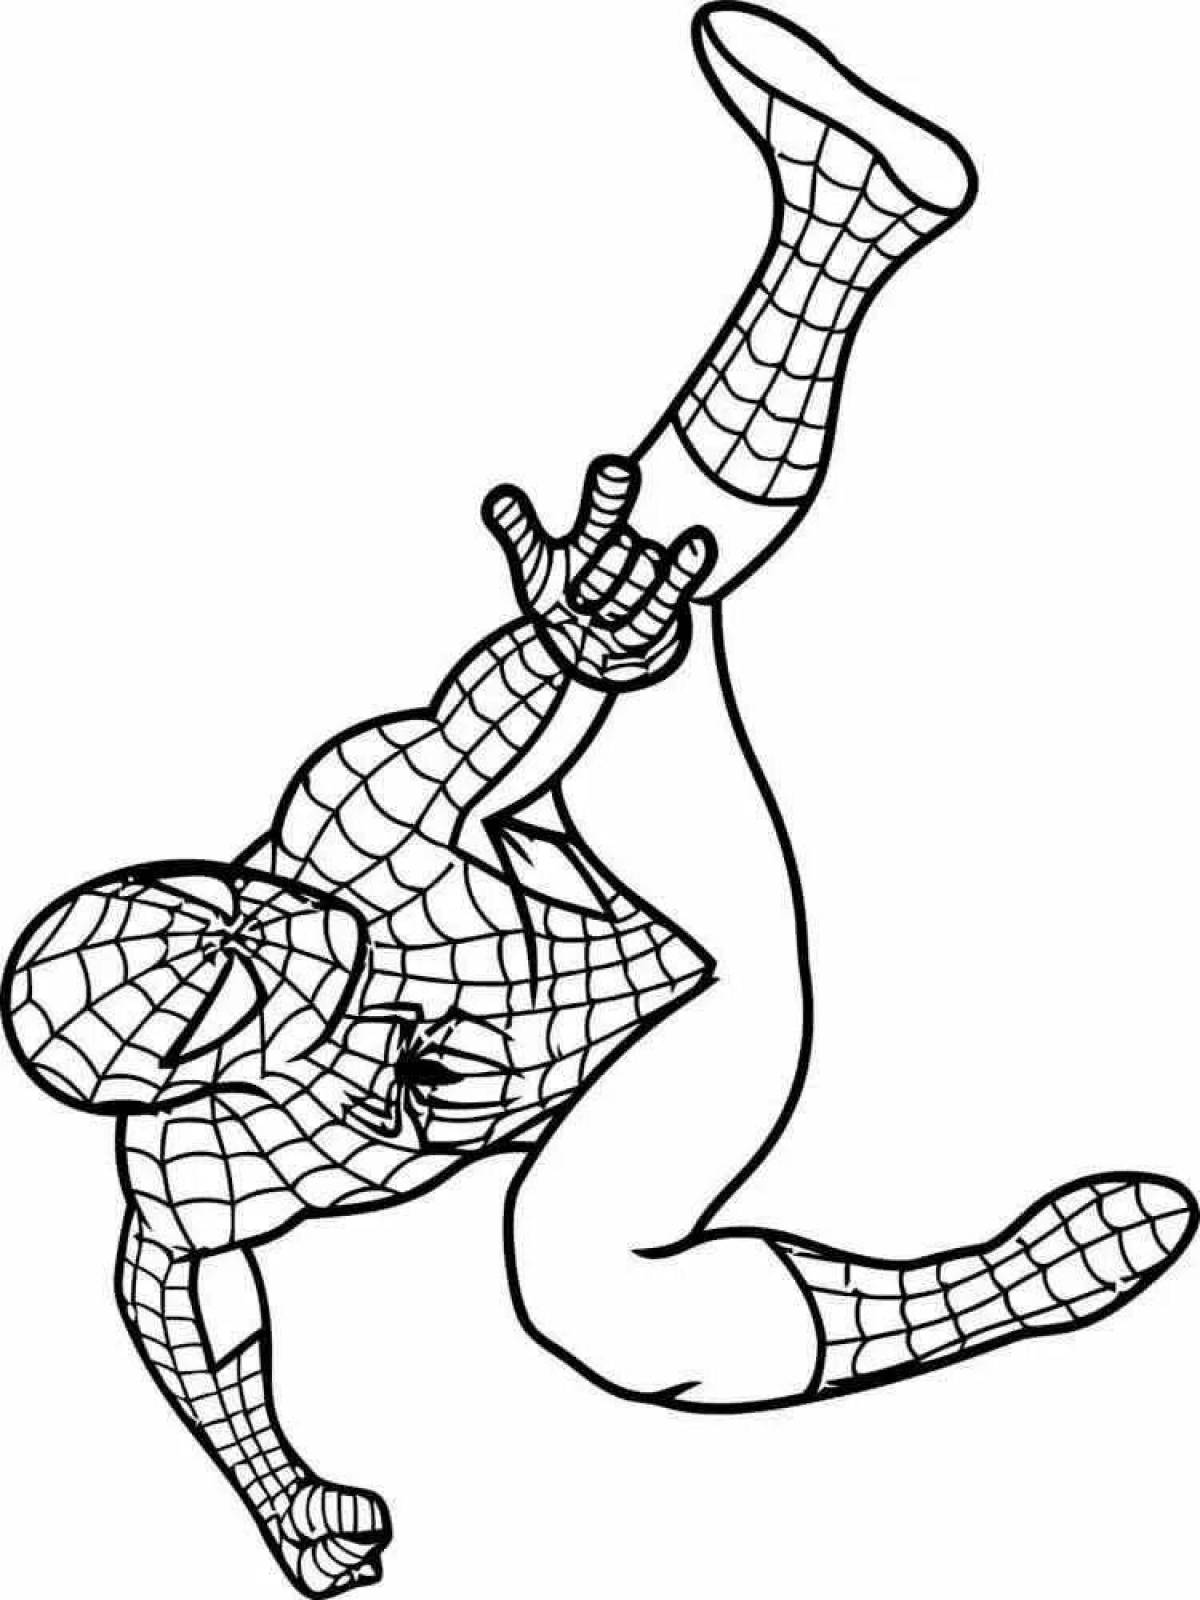 Adorable Spiderman coloring book for kids 5-6 years old